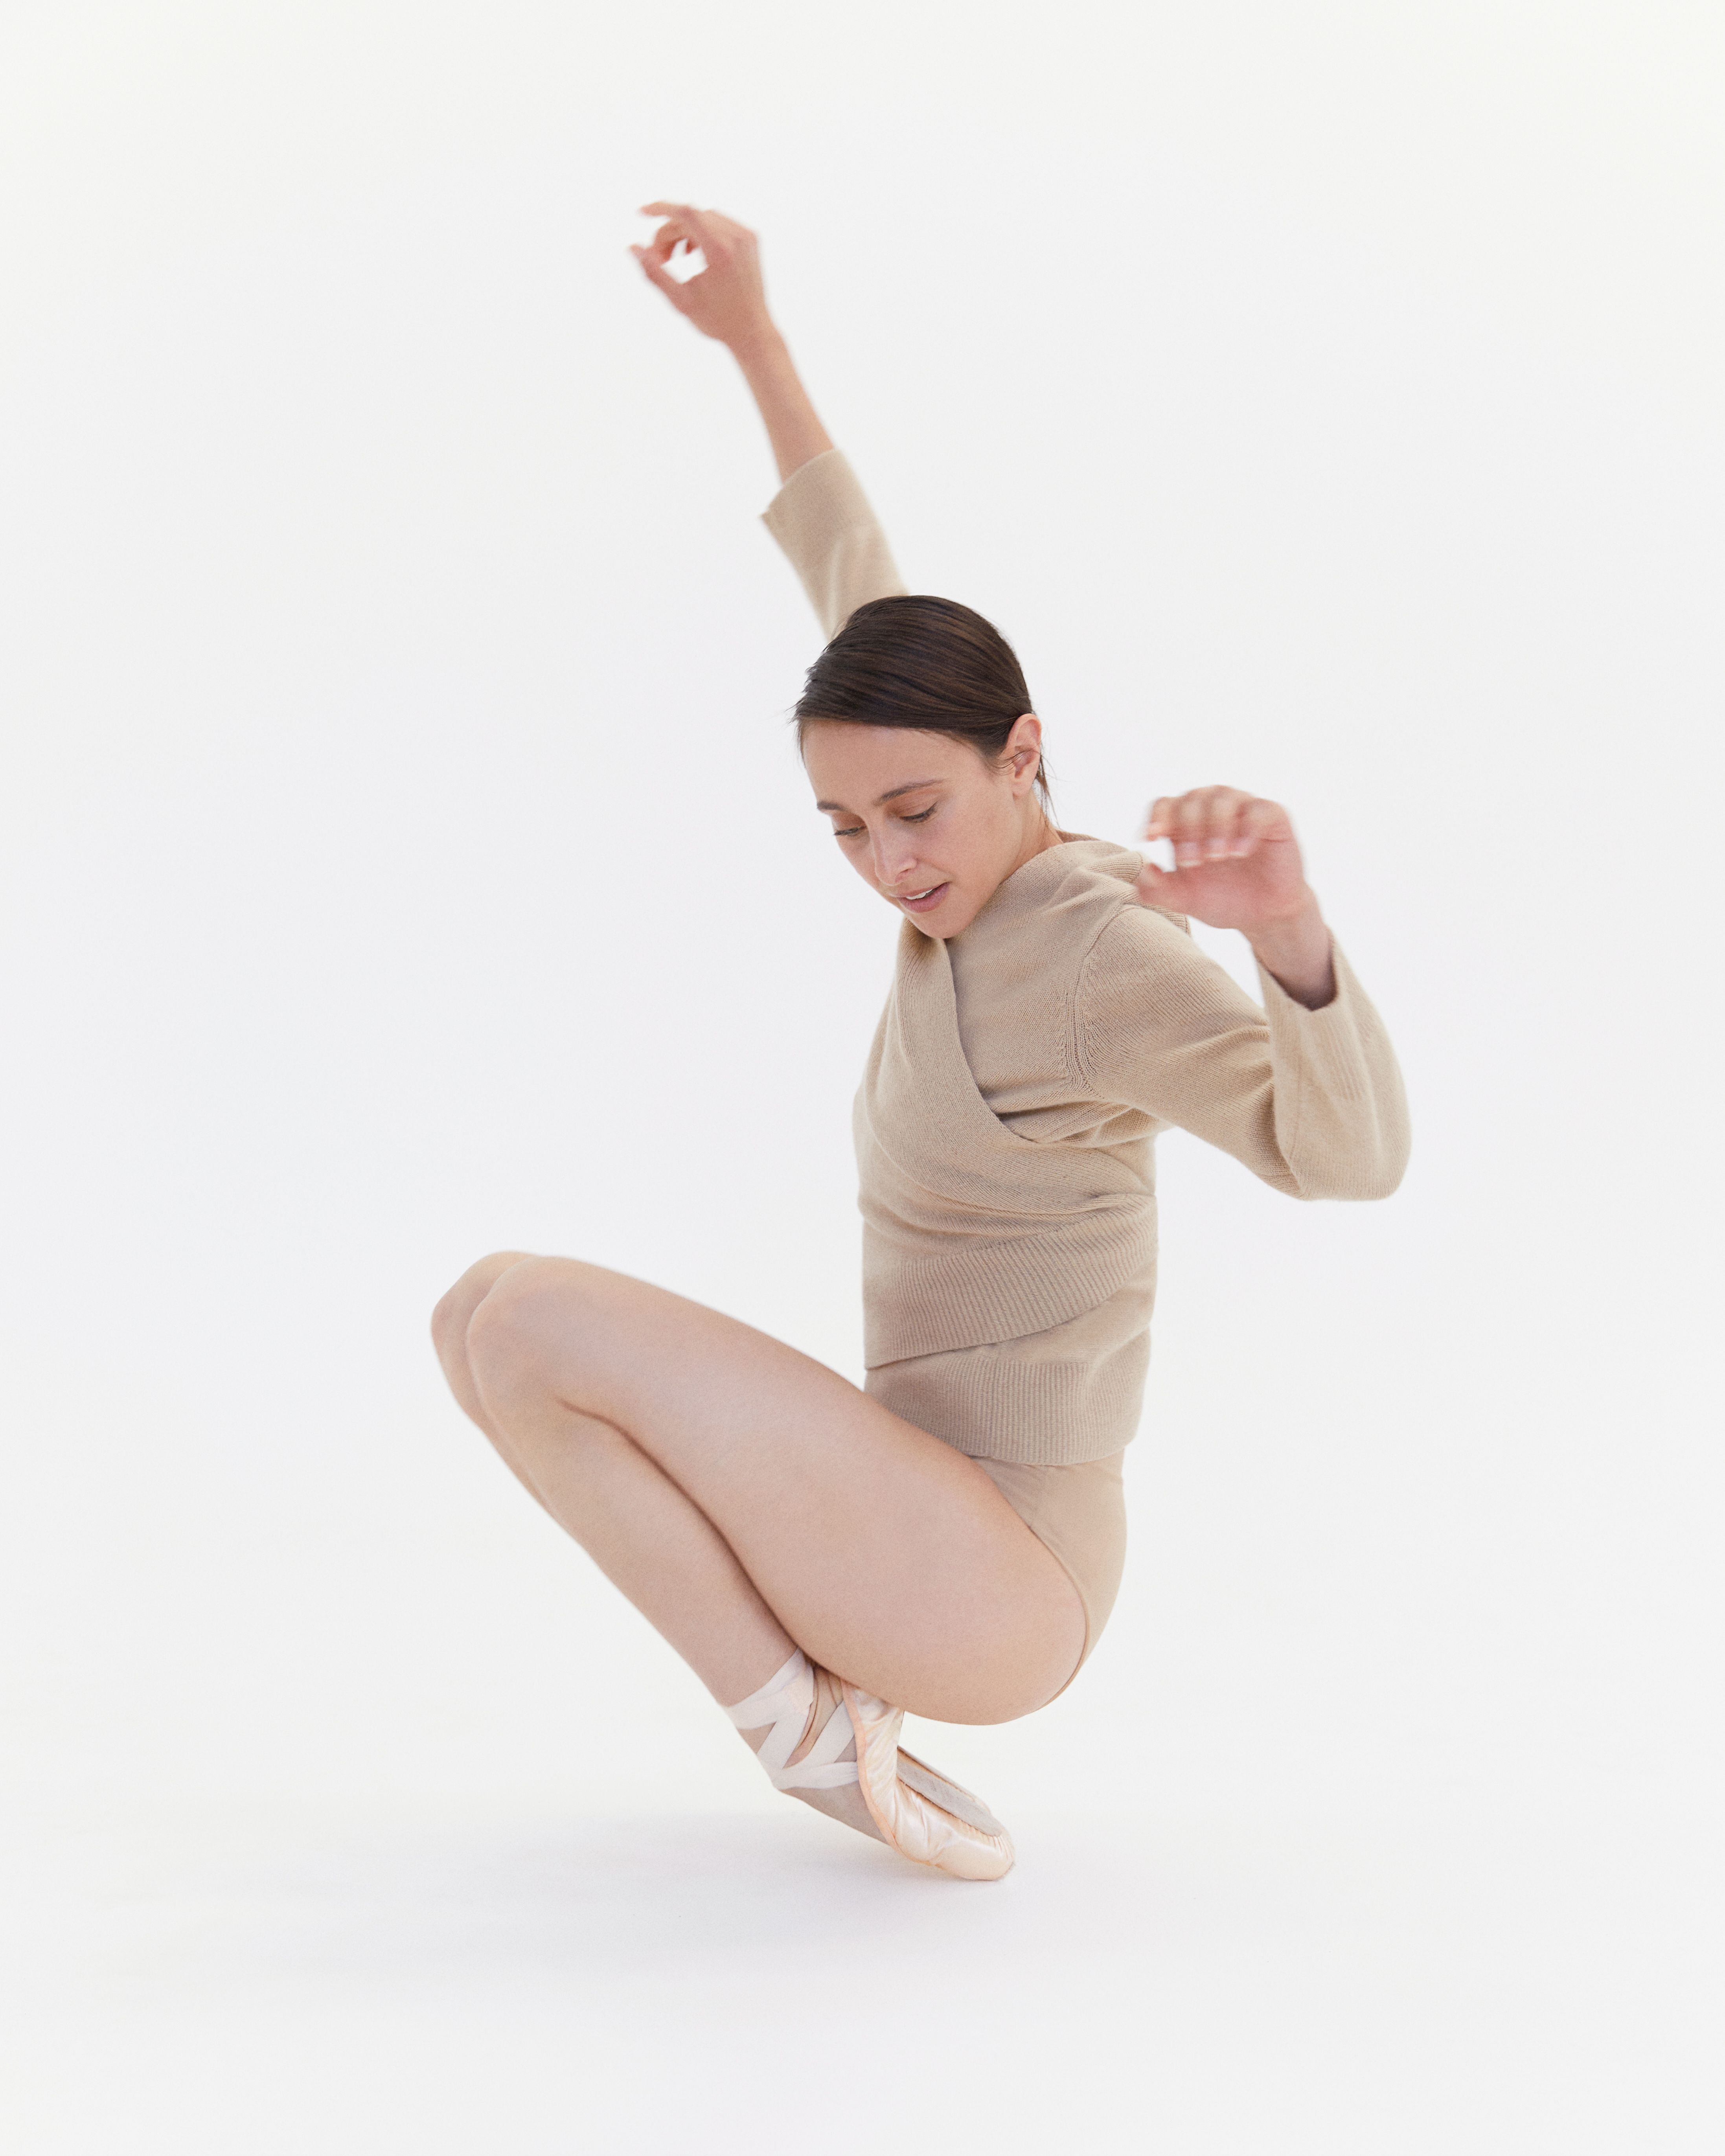 Dimity Azoury kneeling wearing a beige knit and pointe shoes